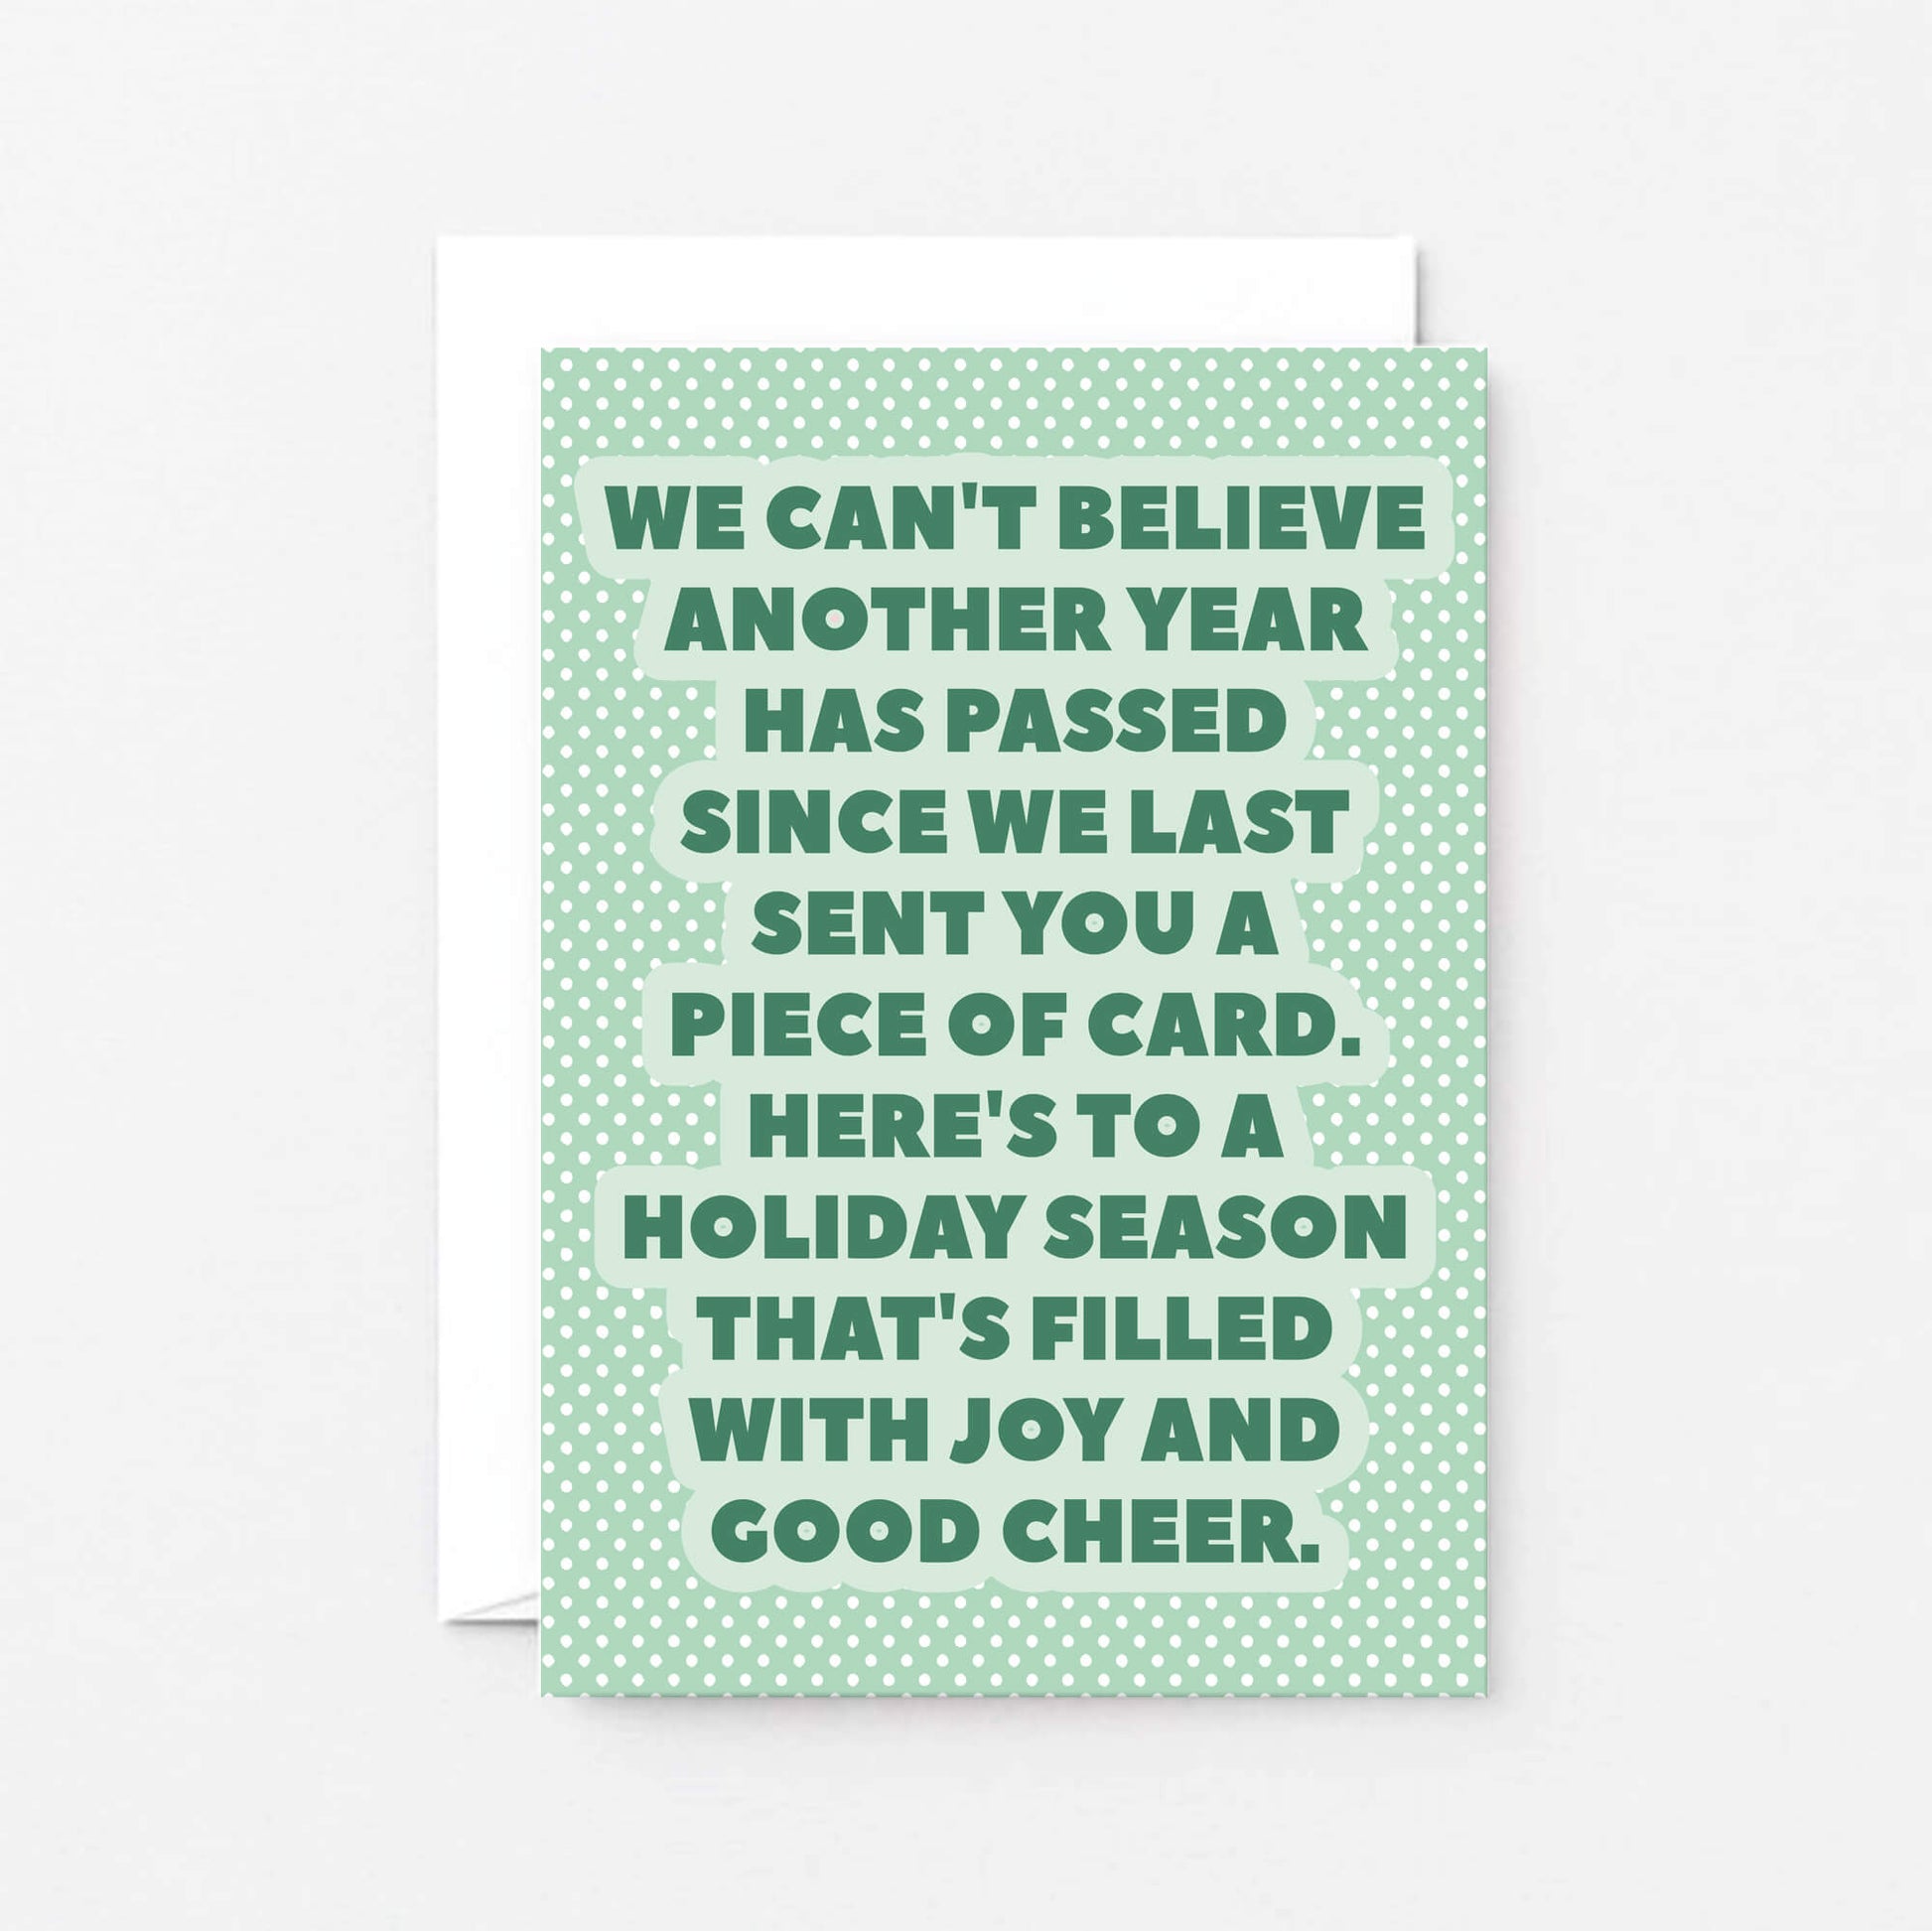 Christmas Card by SixElevenCreations. Reads We can't believe another year has passed since we last sent you a piece of card. Here's to a holiday season that's filled with joy and good cheer. Product Code SEC0077A6